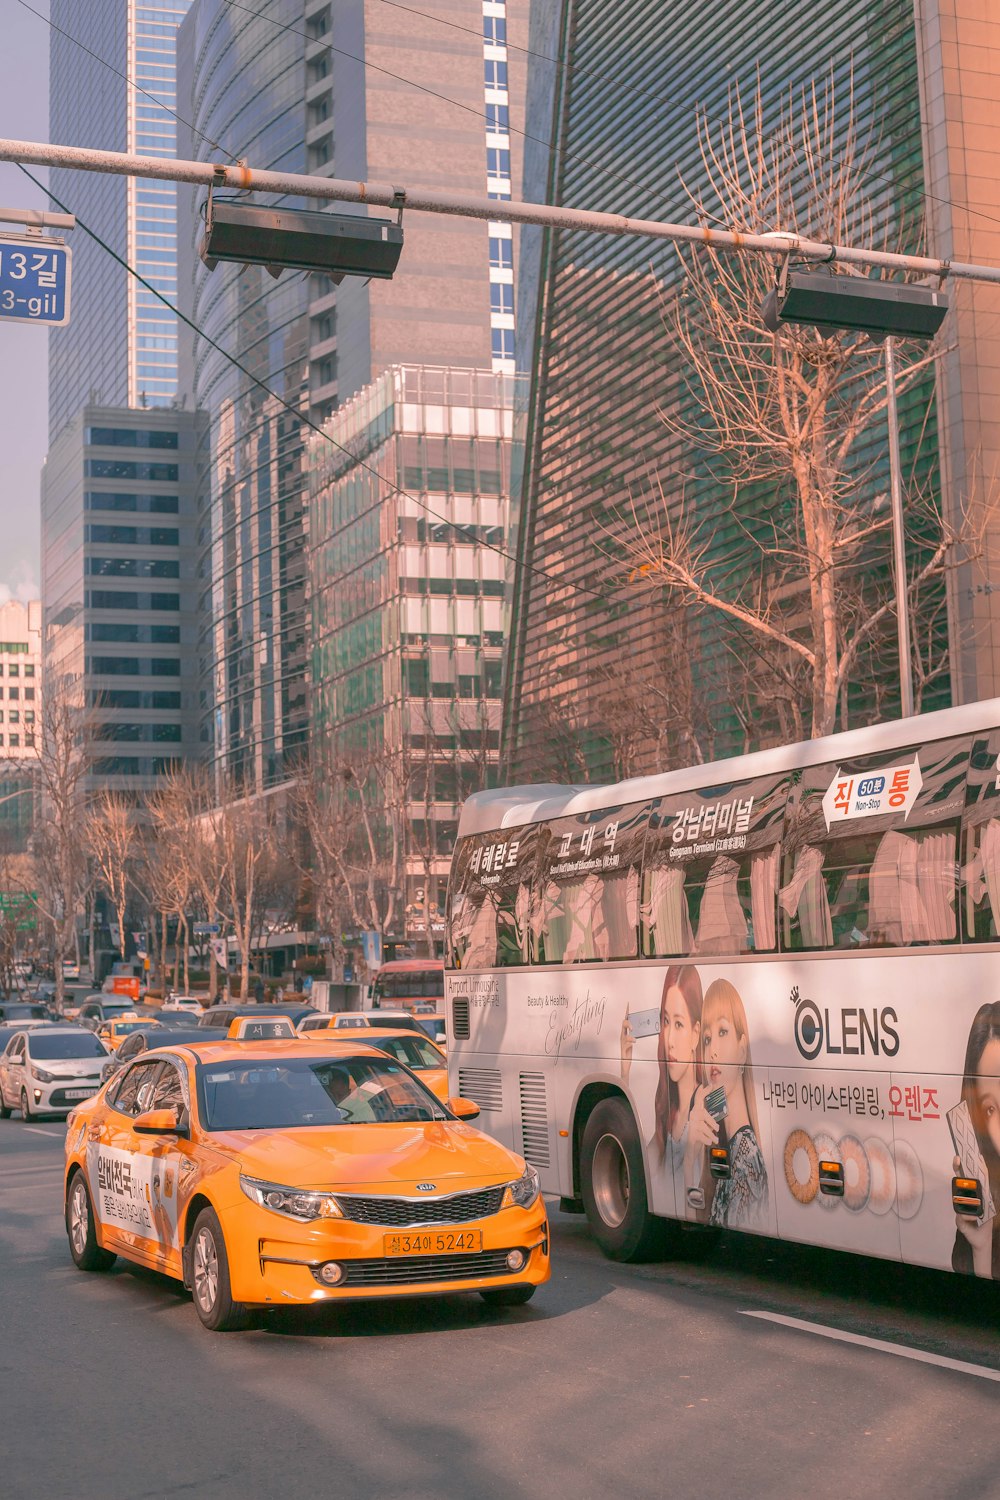 a yellow taxi cab driving down a street next to a bus